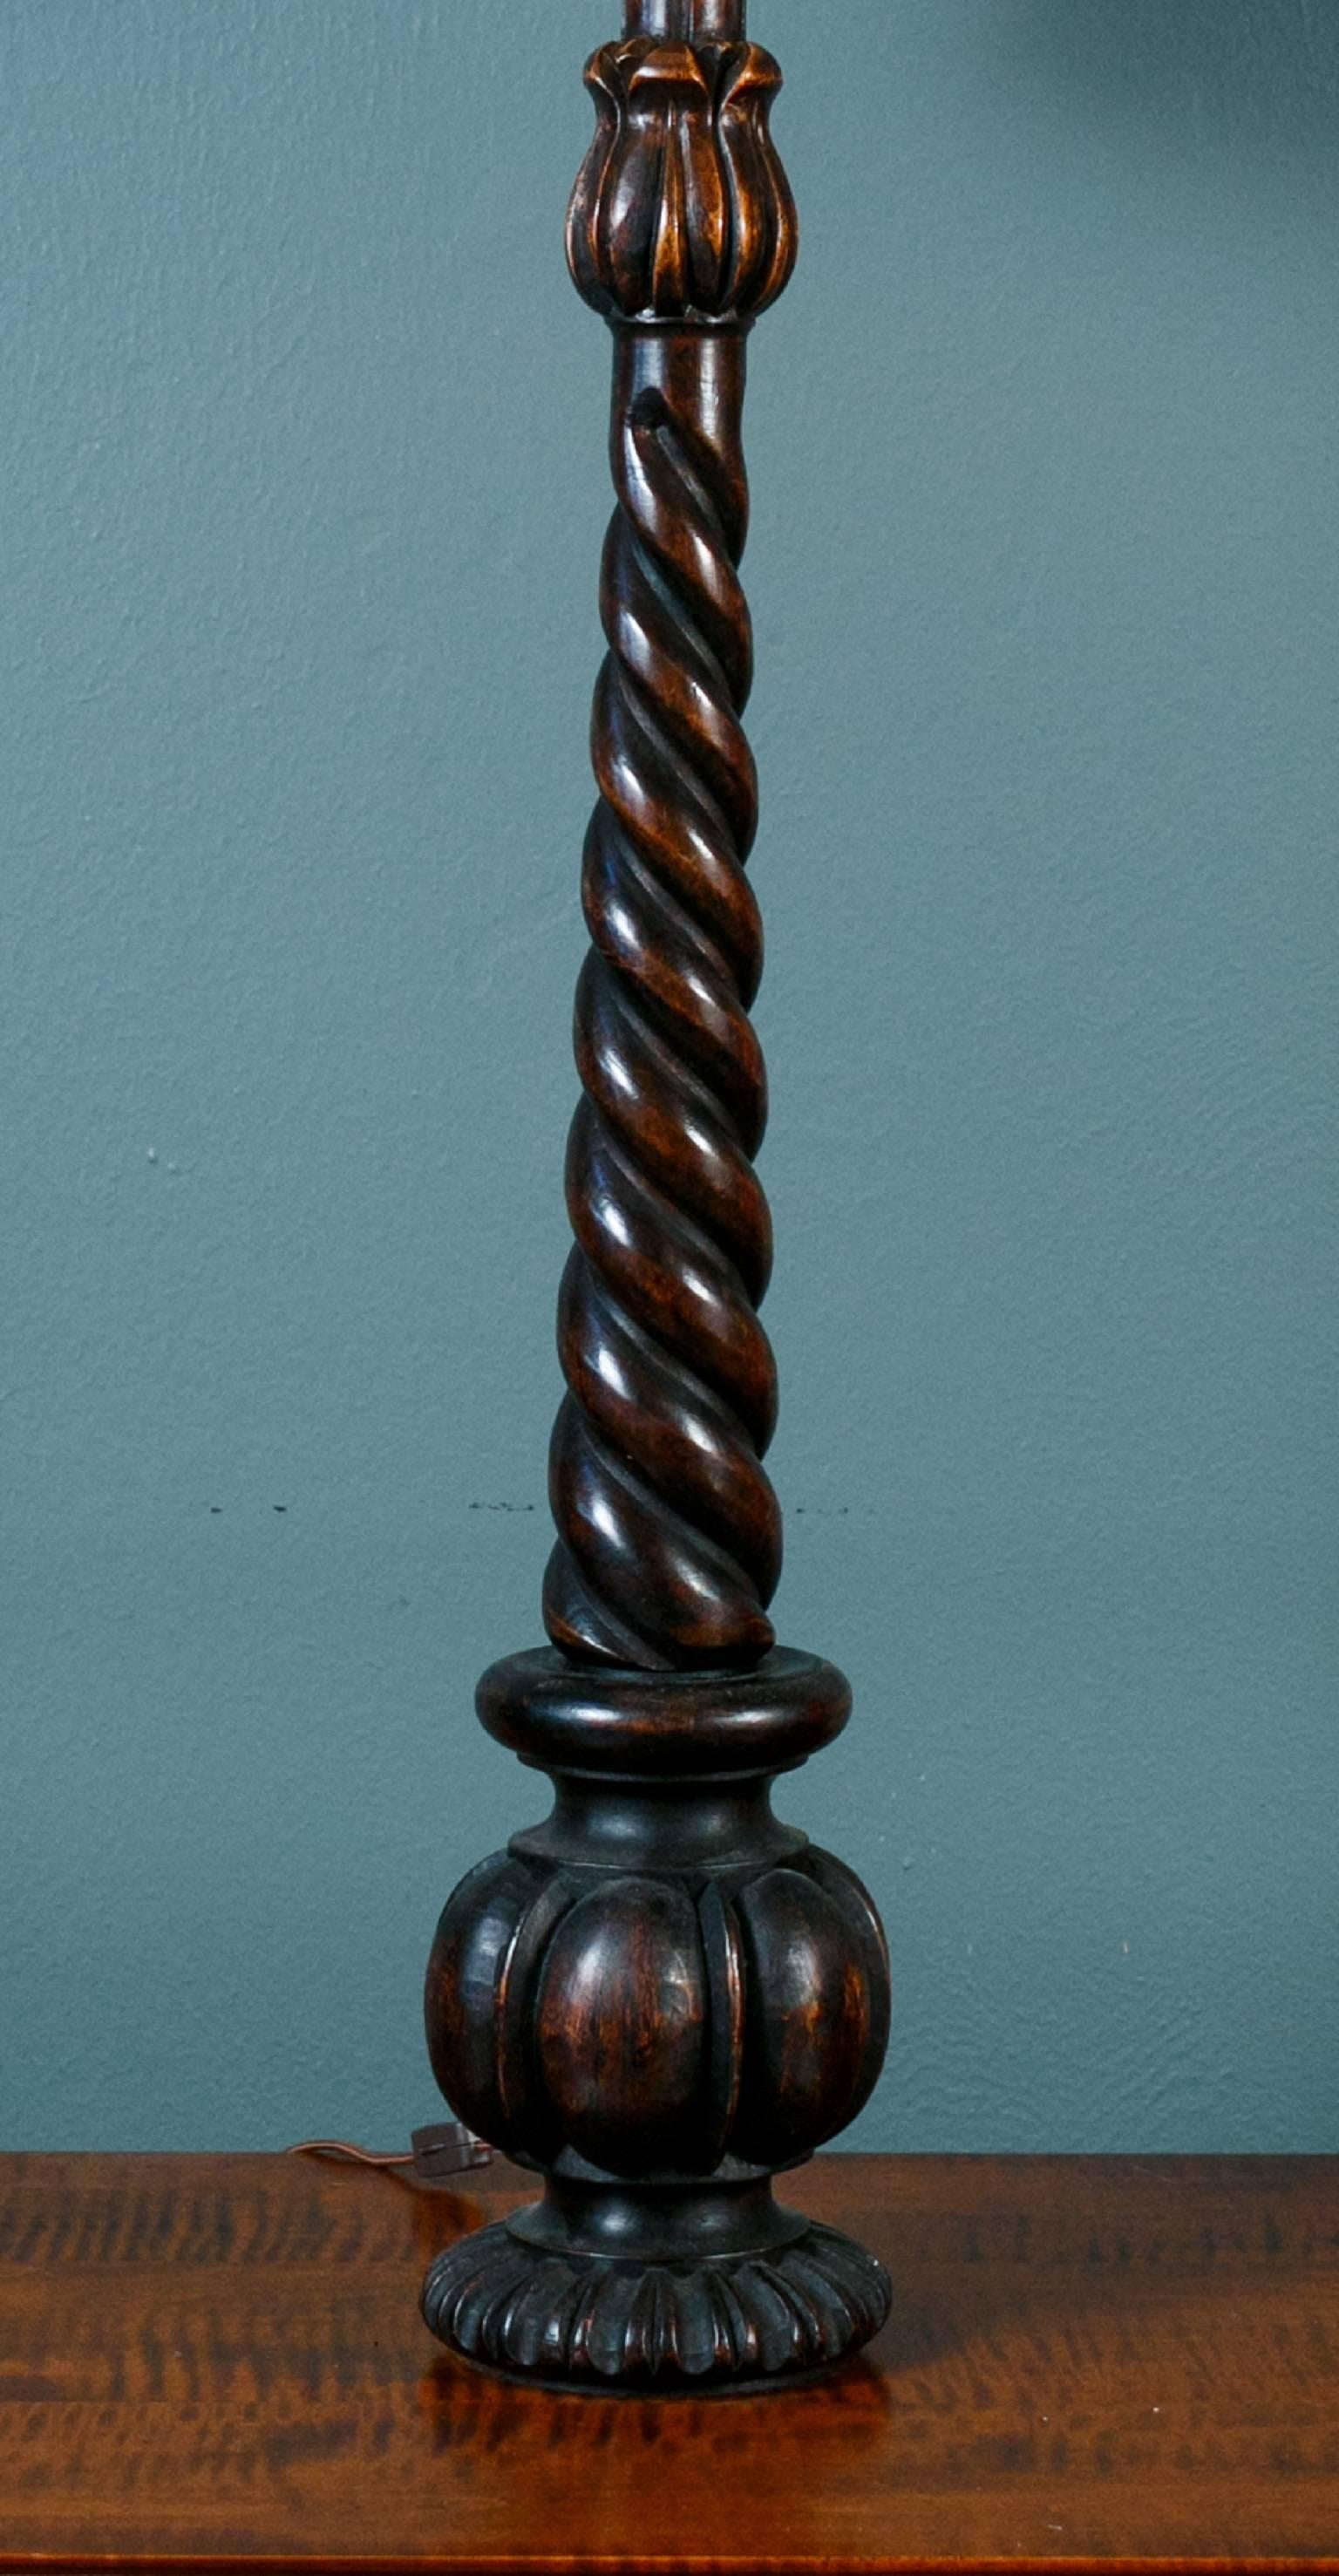 Hand-carved wood barley twist table lamp with custom Belgian linen shade. Beautiful, rich tone in the wood. Newly rewired for use in the USA with all UL listed parts and a single Edison phenolic socket and line switch. Measurement listed is with